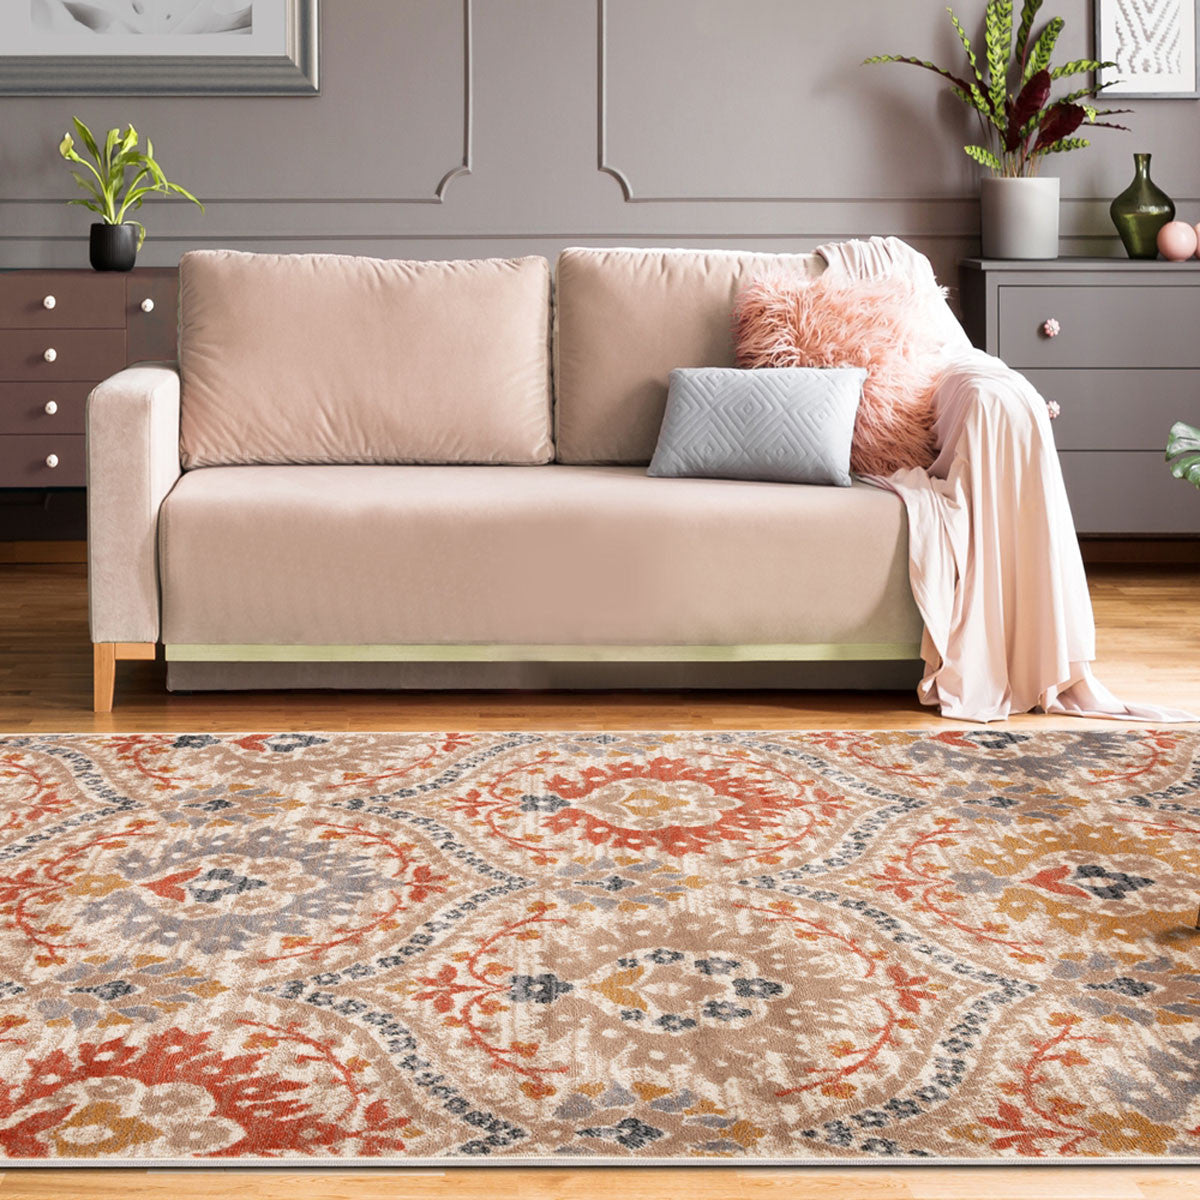 5' X 8' Ivory Orange And Gray Floral Stain Resistant Area Rug